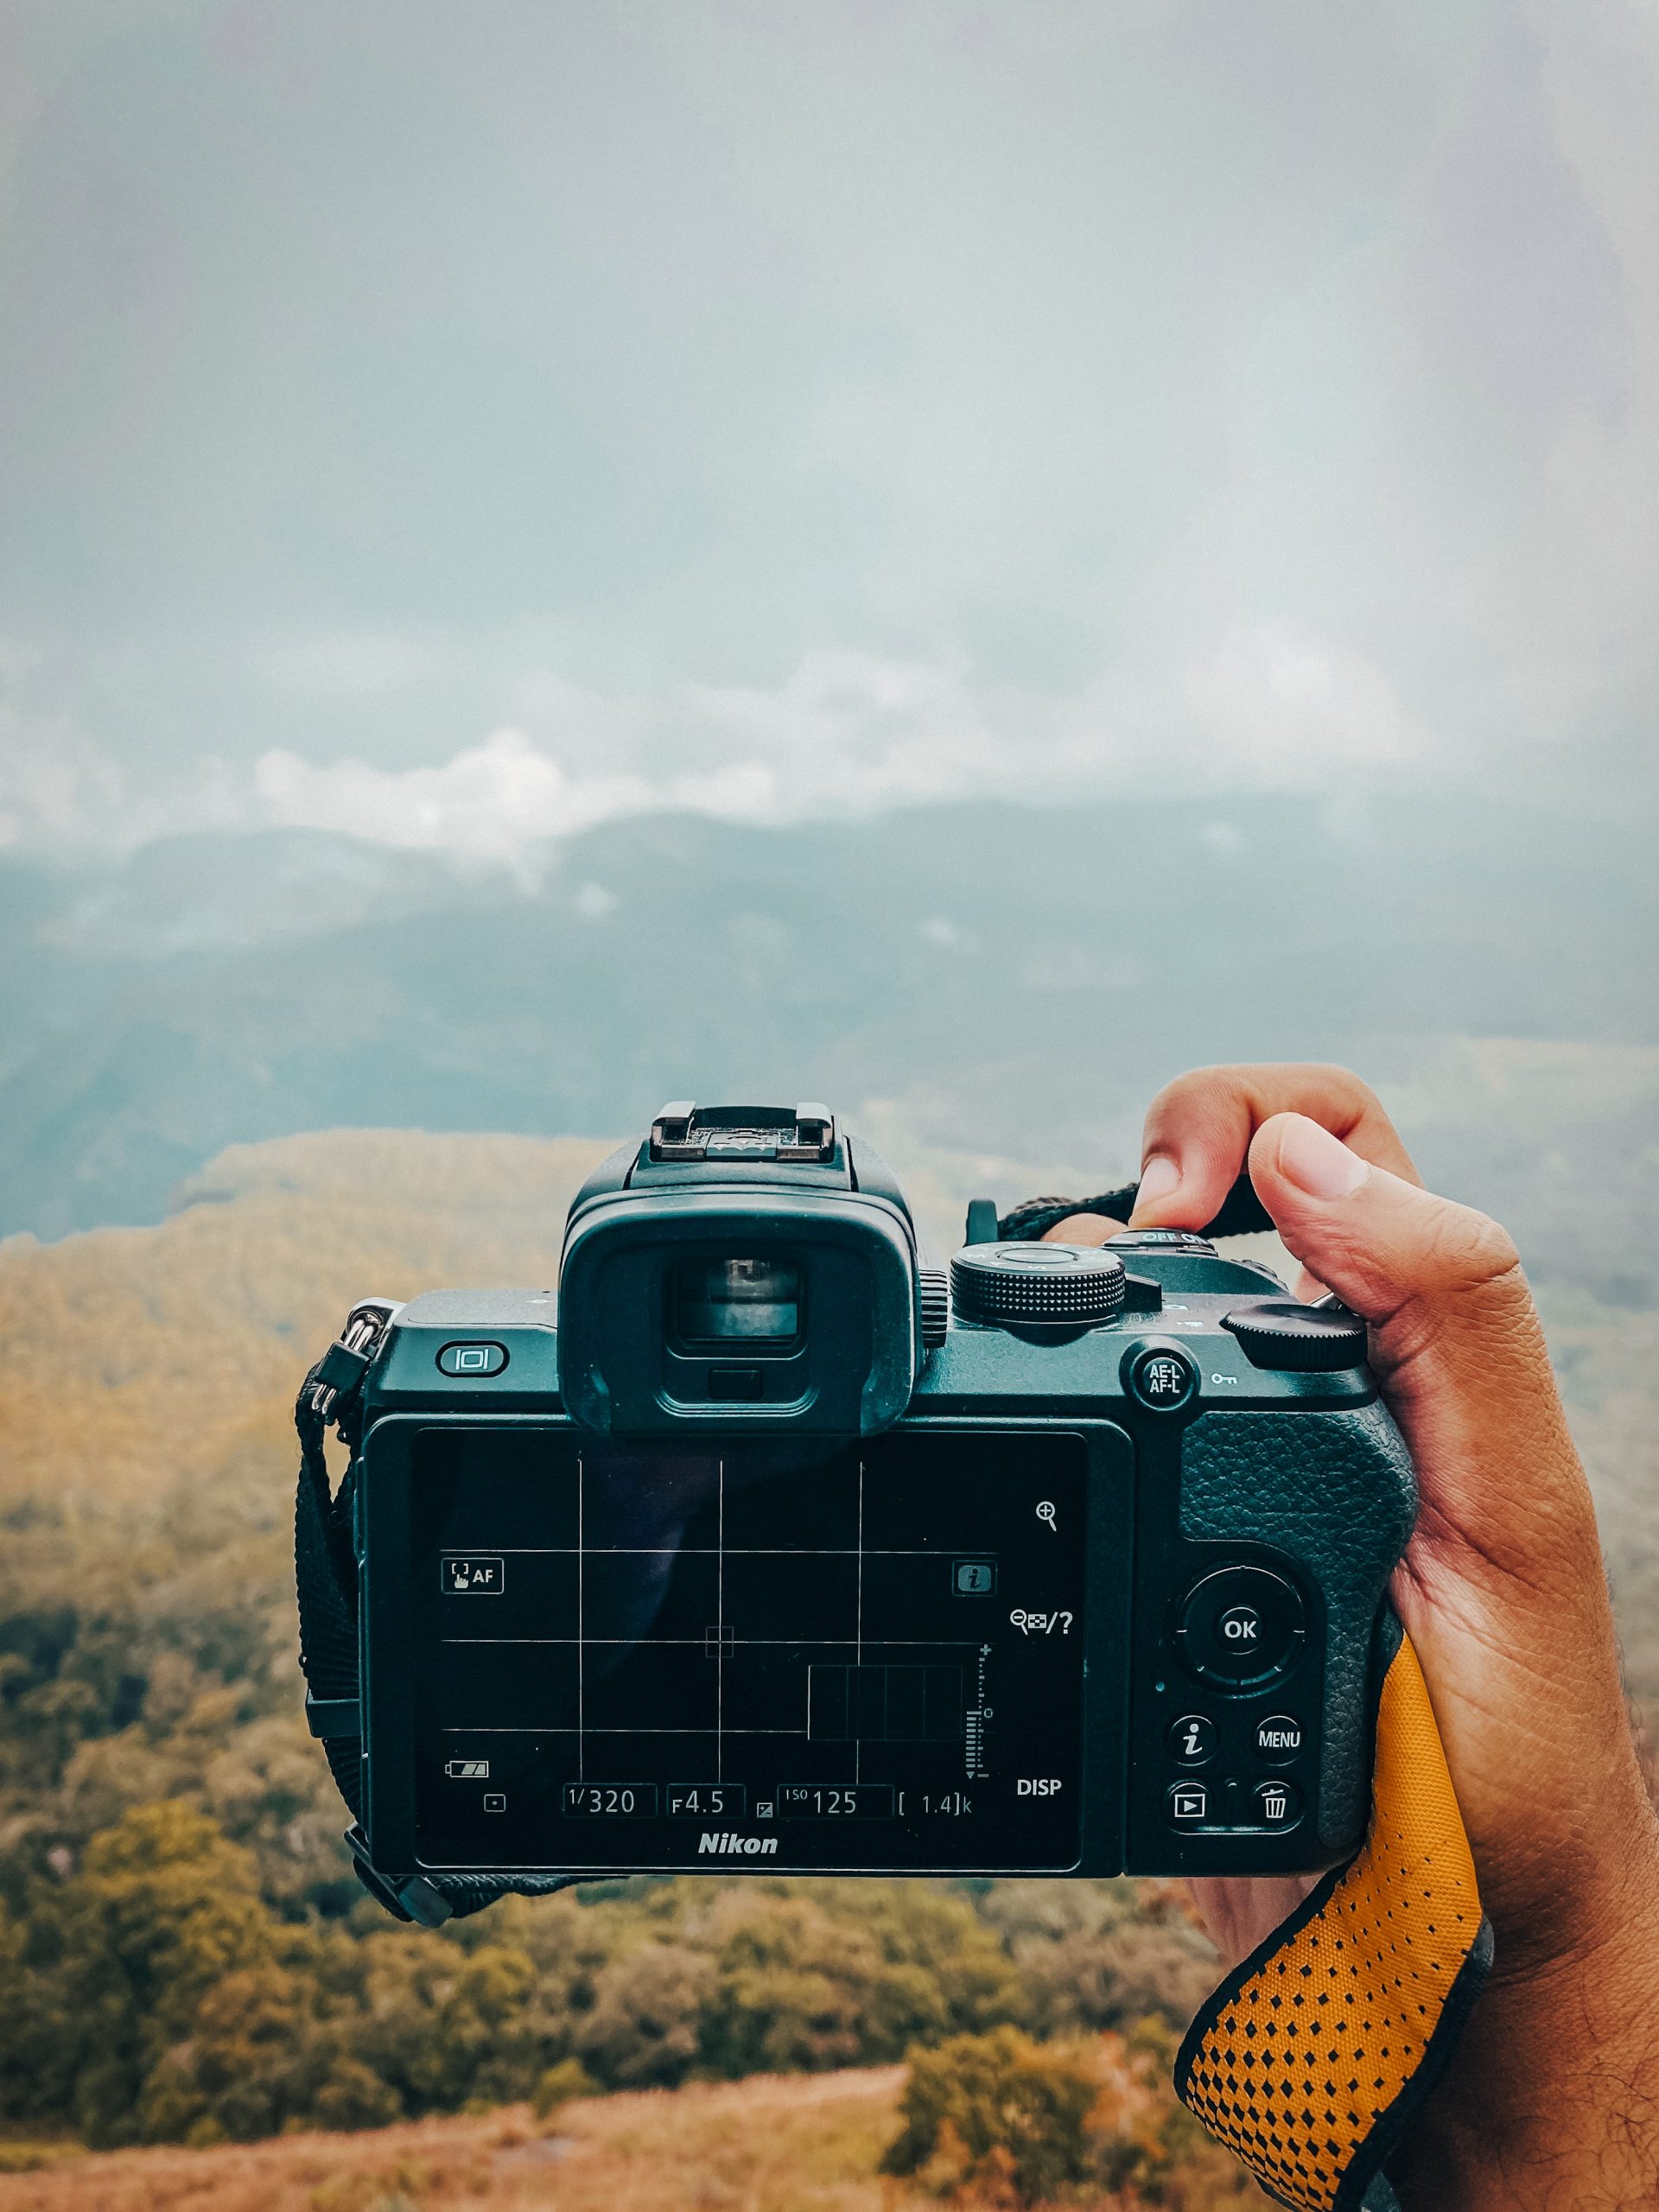 Shooting landscape with camera